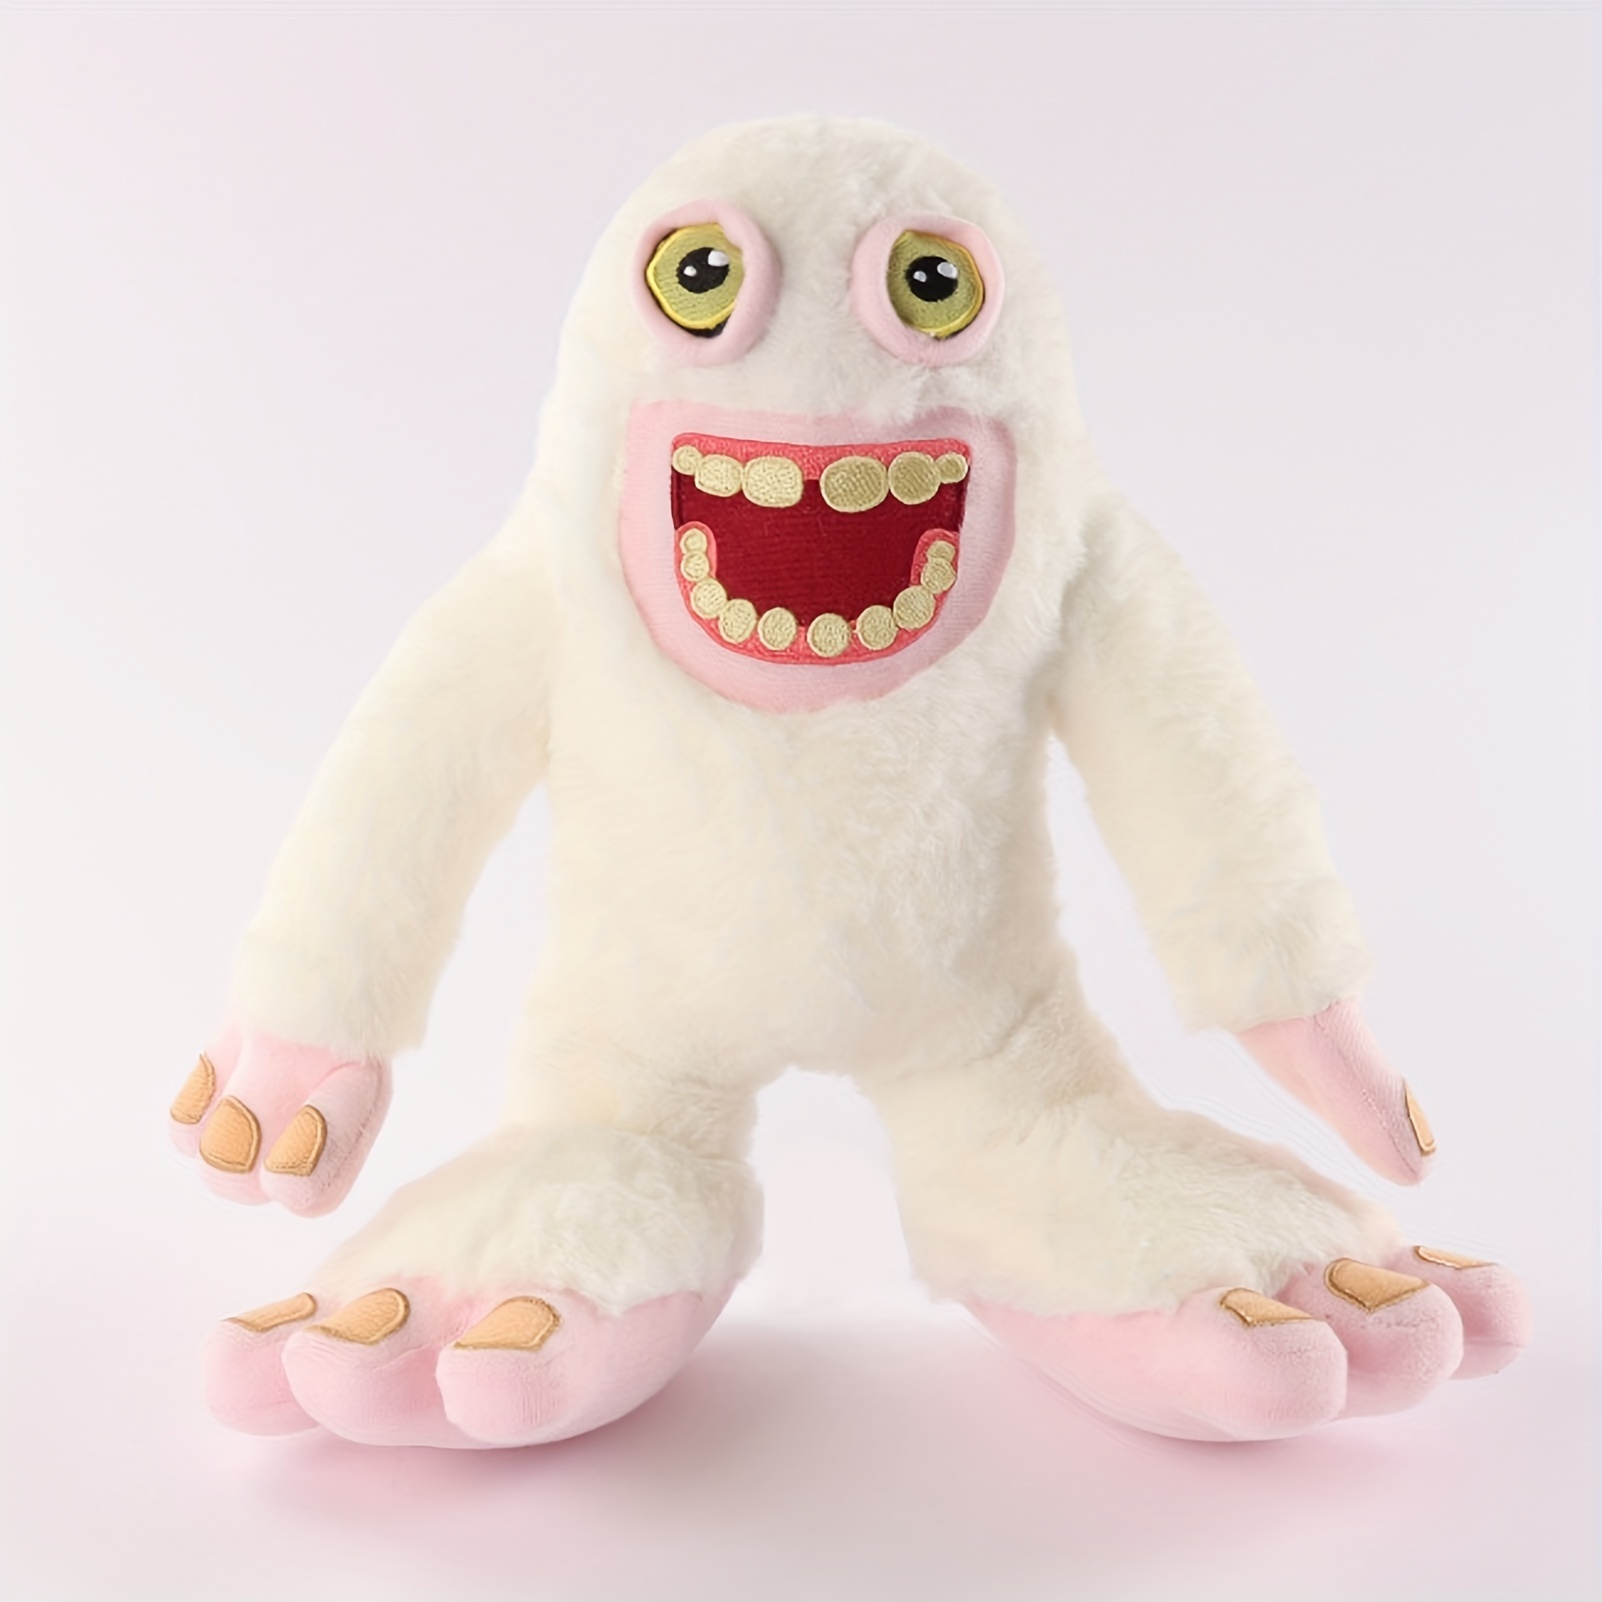 Wubbox Plush, 11.8-inch Wubbox Plush My Singing Monster Toy, Gifts for Game  Lovers, Children and Fans Friends, Birthday Gifts-White 